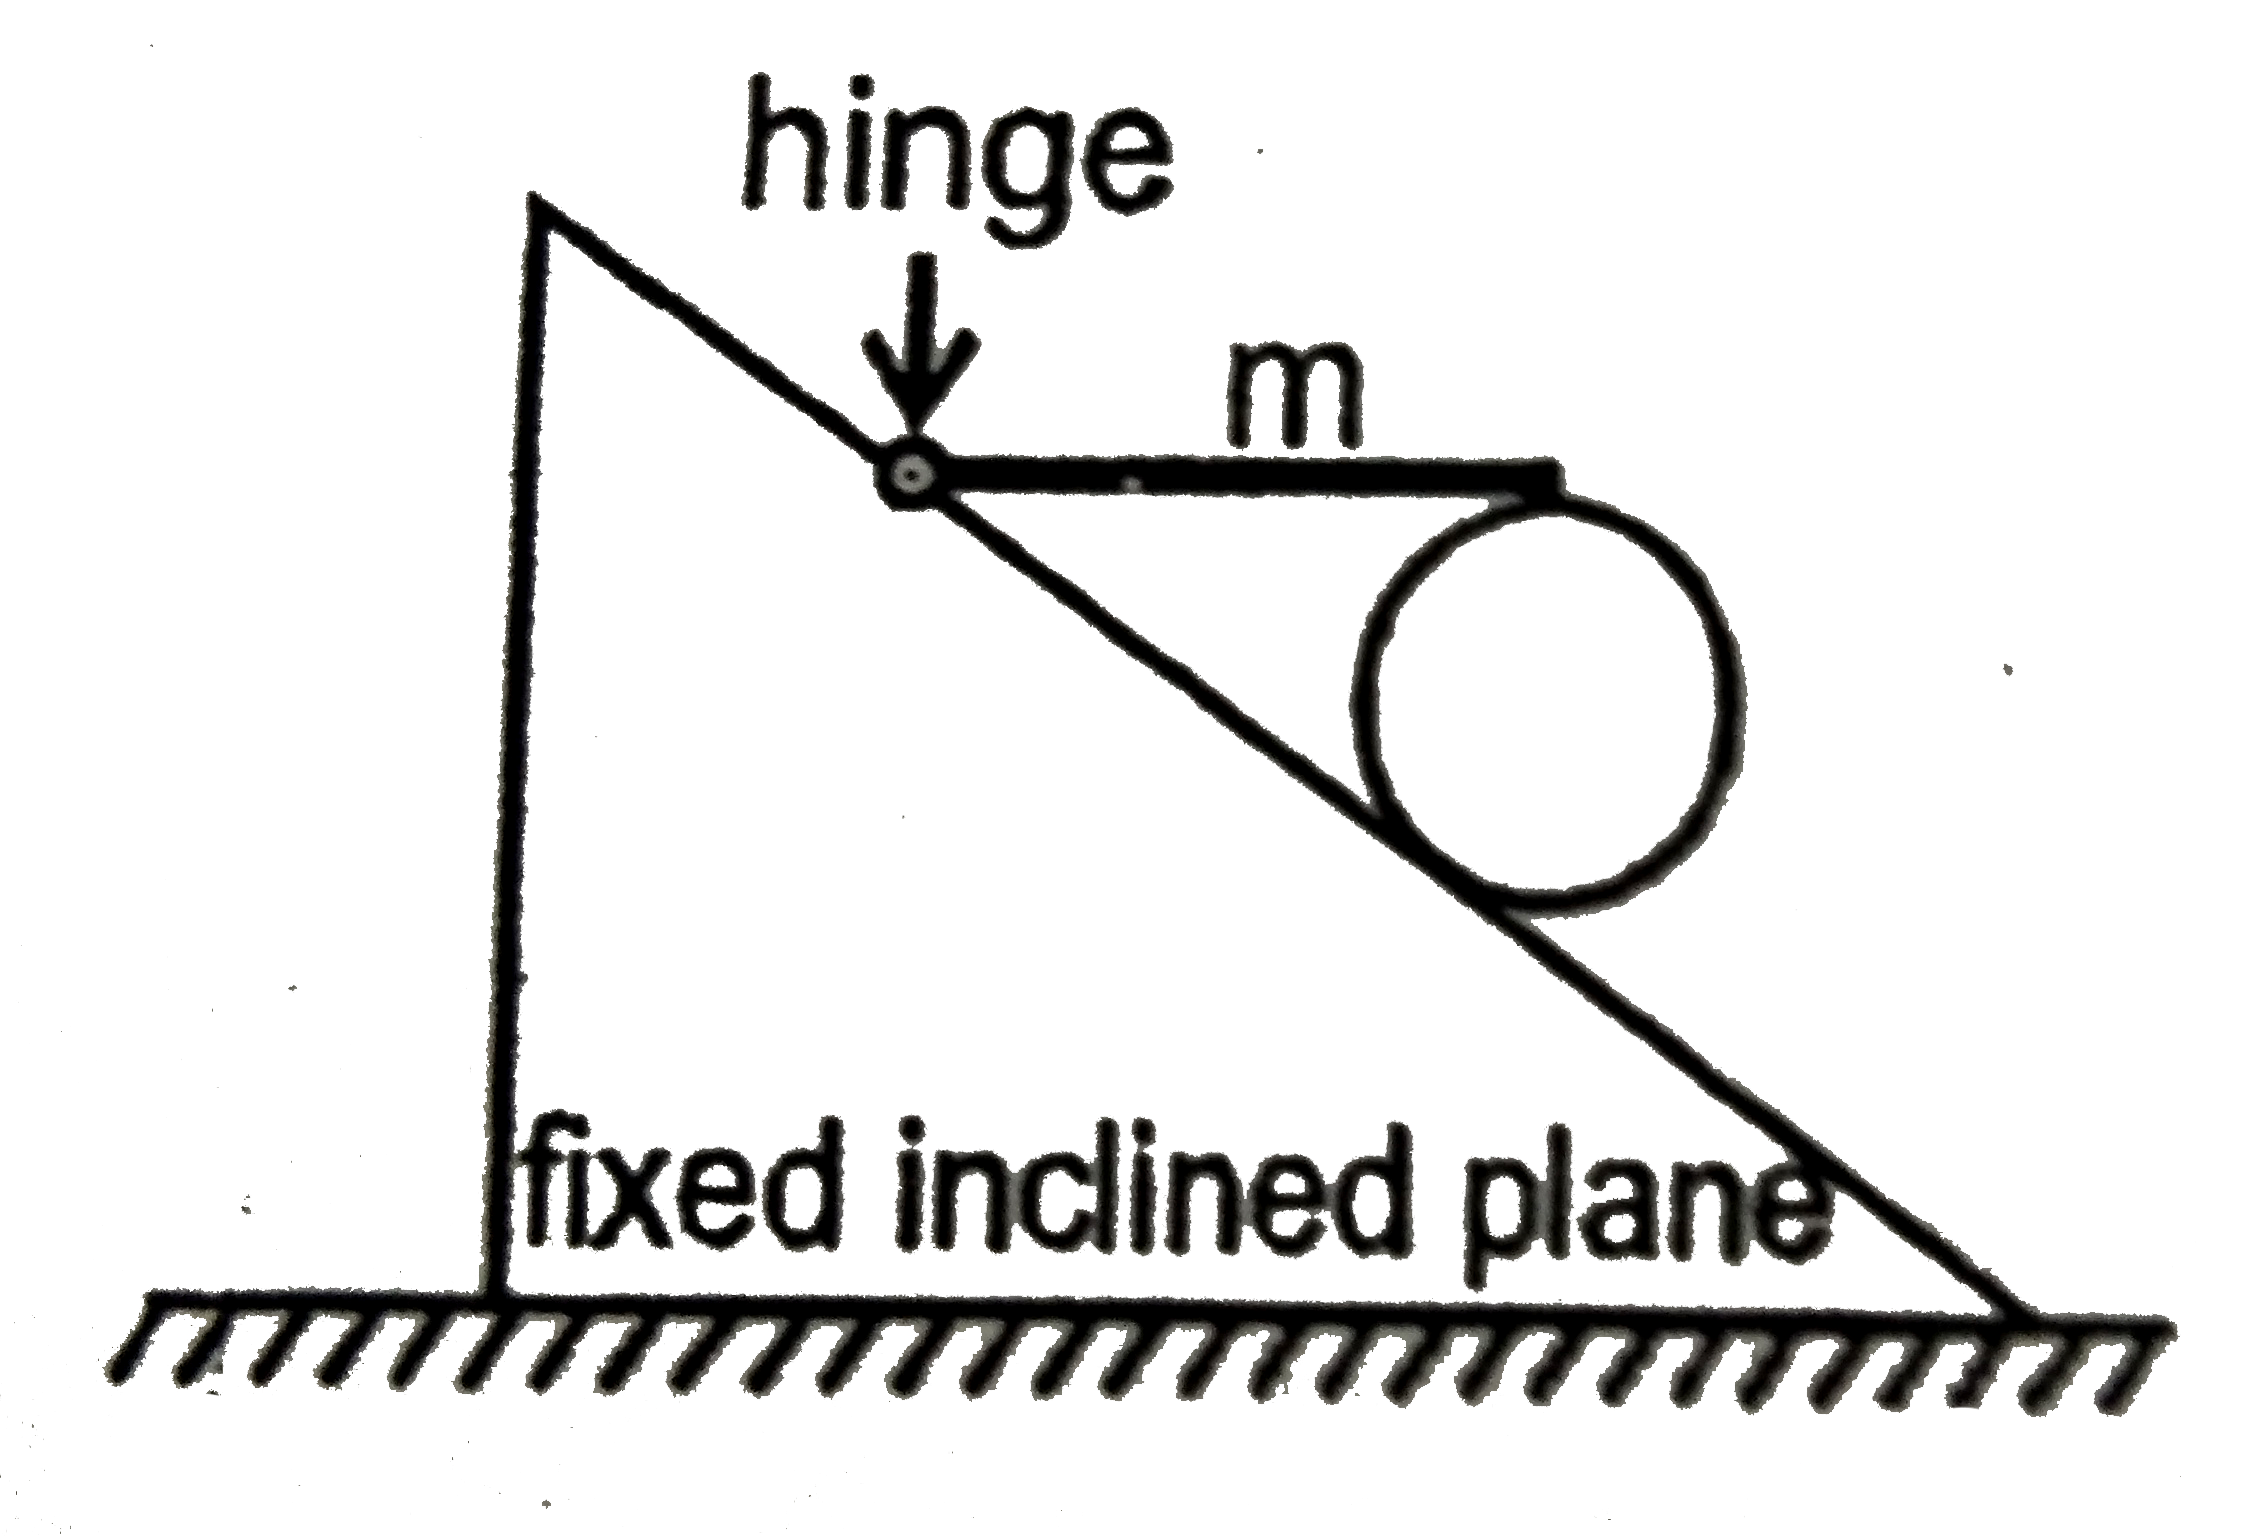 A horizontal uniform rod of mass 'm' has its left end hinged to the fixed incline plane, while its right end rrests on the top of a uniform cylinder of mass 'm' which in turn is at rest on the fixed inclined plane as shown. The coefficient of friction between the cylinder and rod, and between the cylinder and inclined plane, is sufficient to keep the cylinder at rest.      The ratio of magnitude of frictional force on the cylinder due to the rod and the magnitude of frictional force on the cylinder due to the inclined plane is :